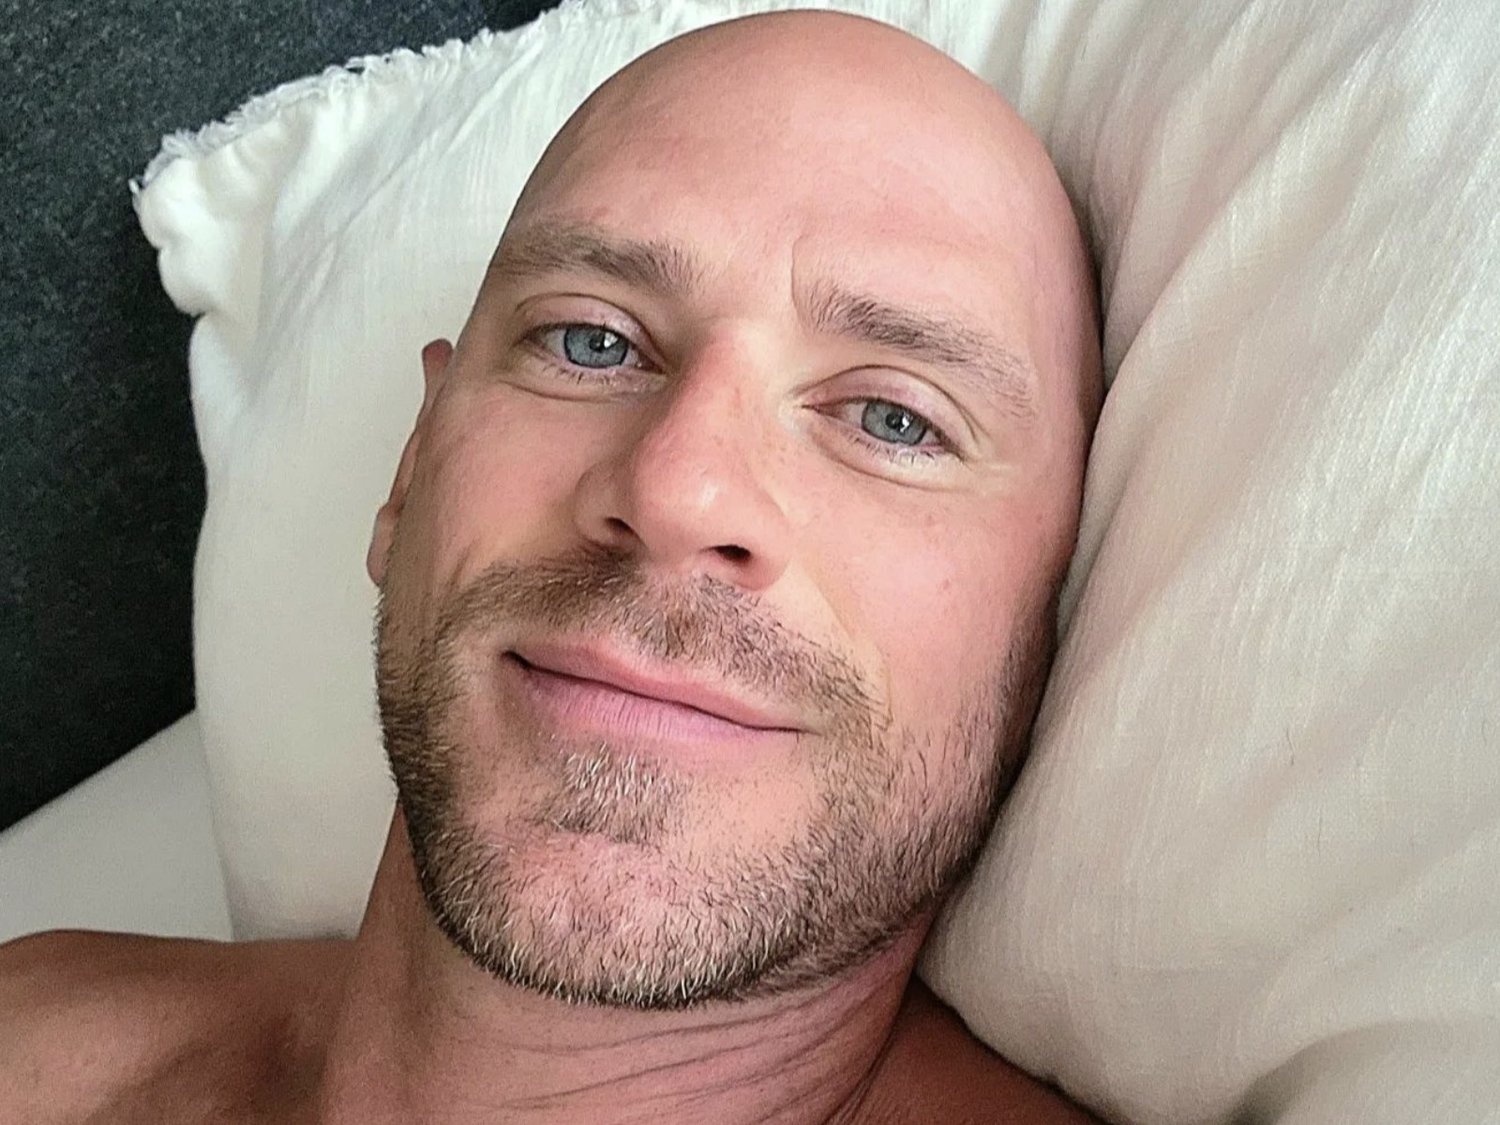 Bjohny - 22 Astounding Facts About Johnny Sins - Facts.net